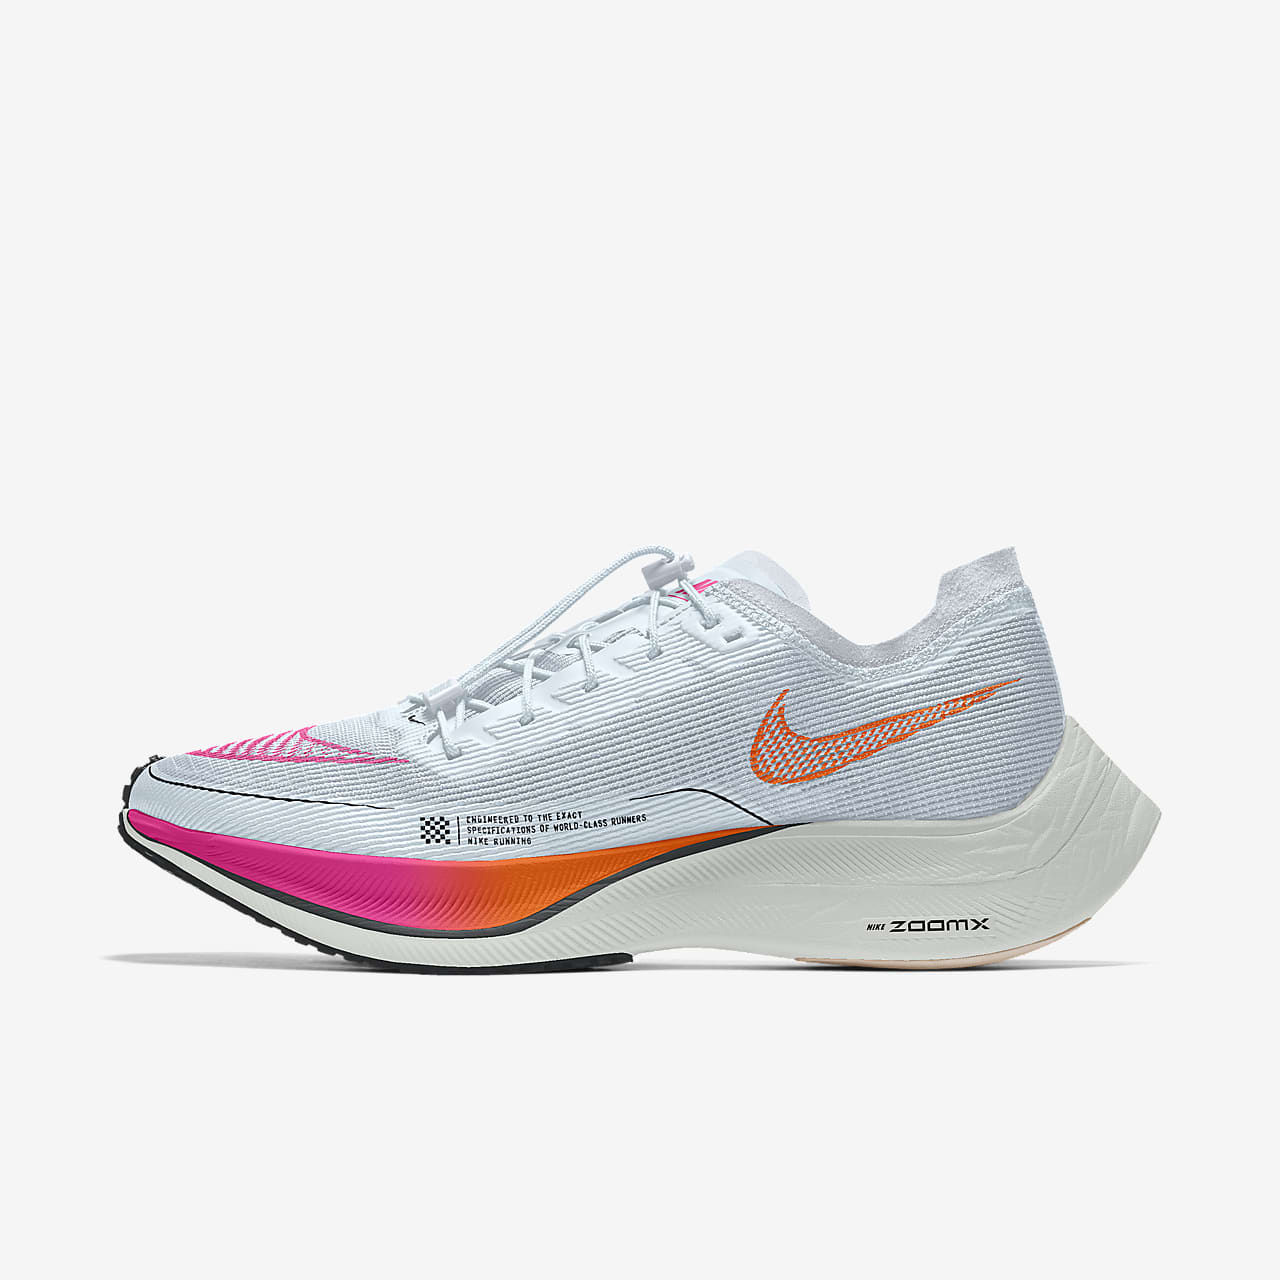 Nike ZoomX Vaporfly NEXT% 2 By You Men's Road Racing Shoes